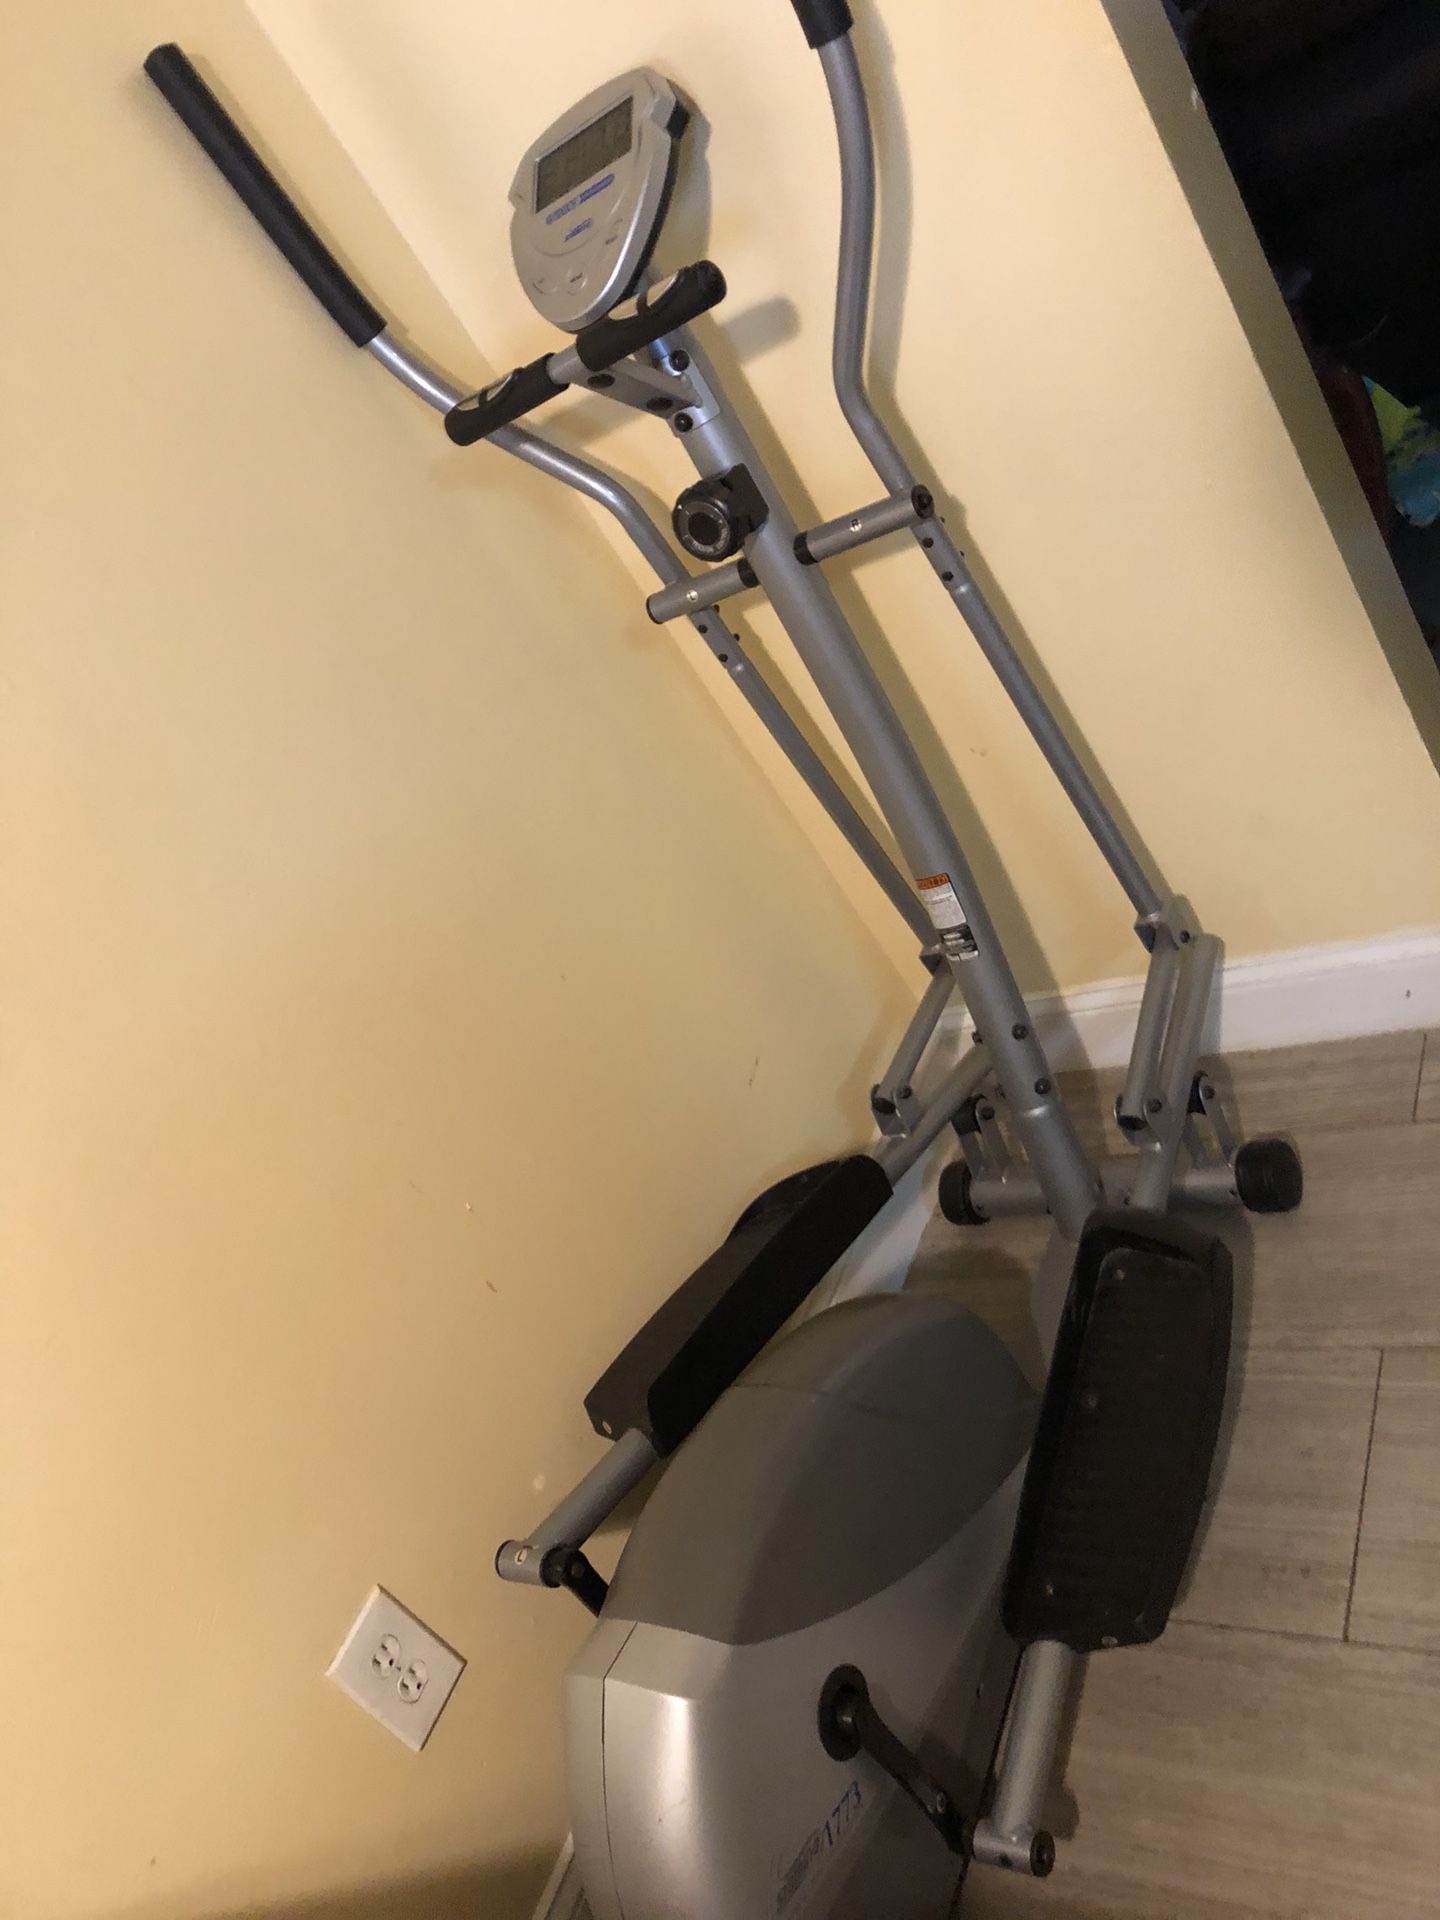 Cross trainer for sale $100